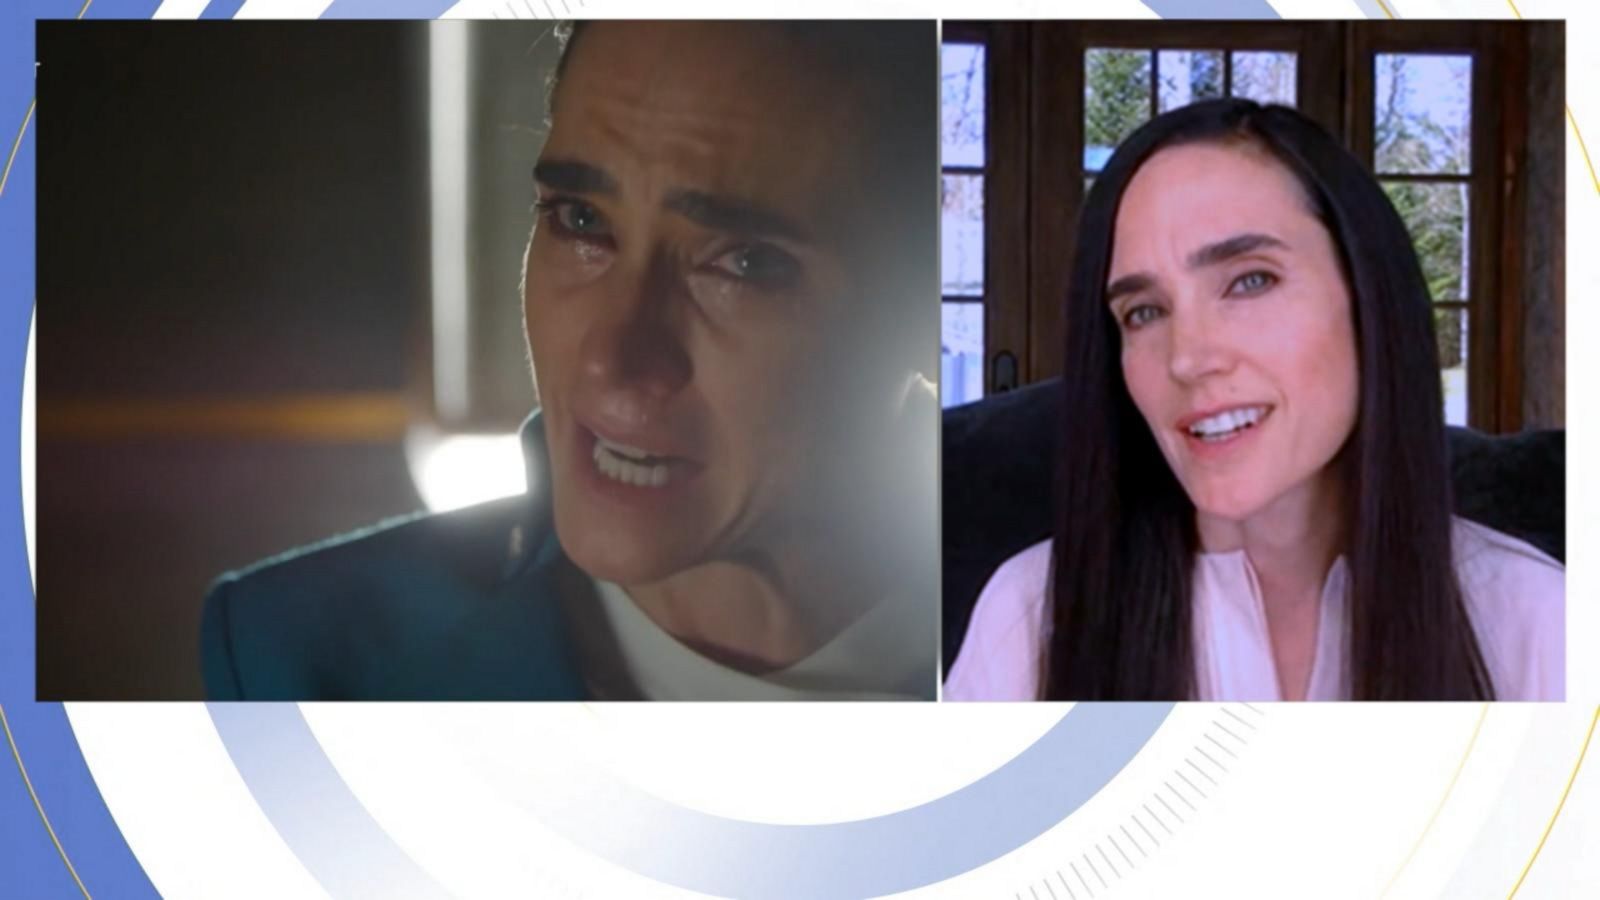 Jennifer Connelly feels safe working with husband